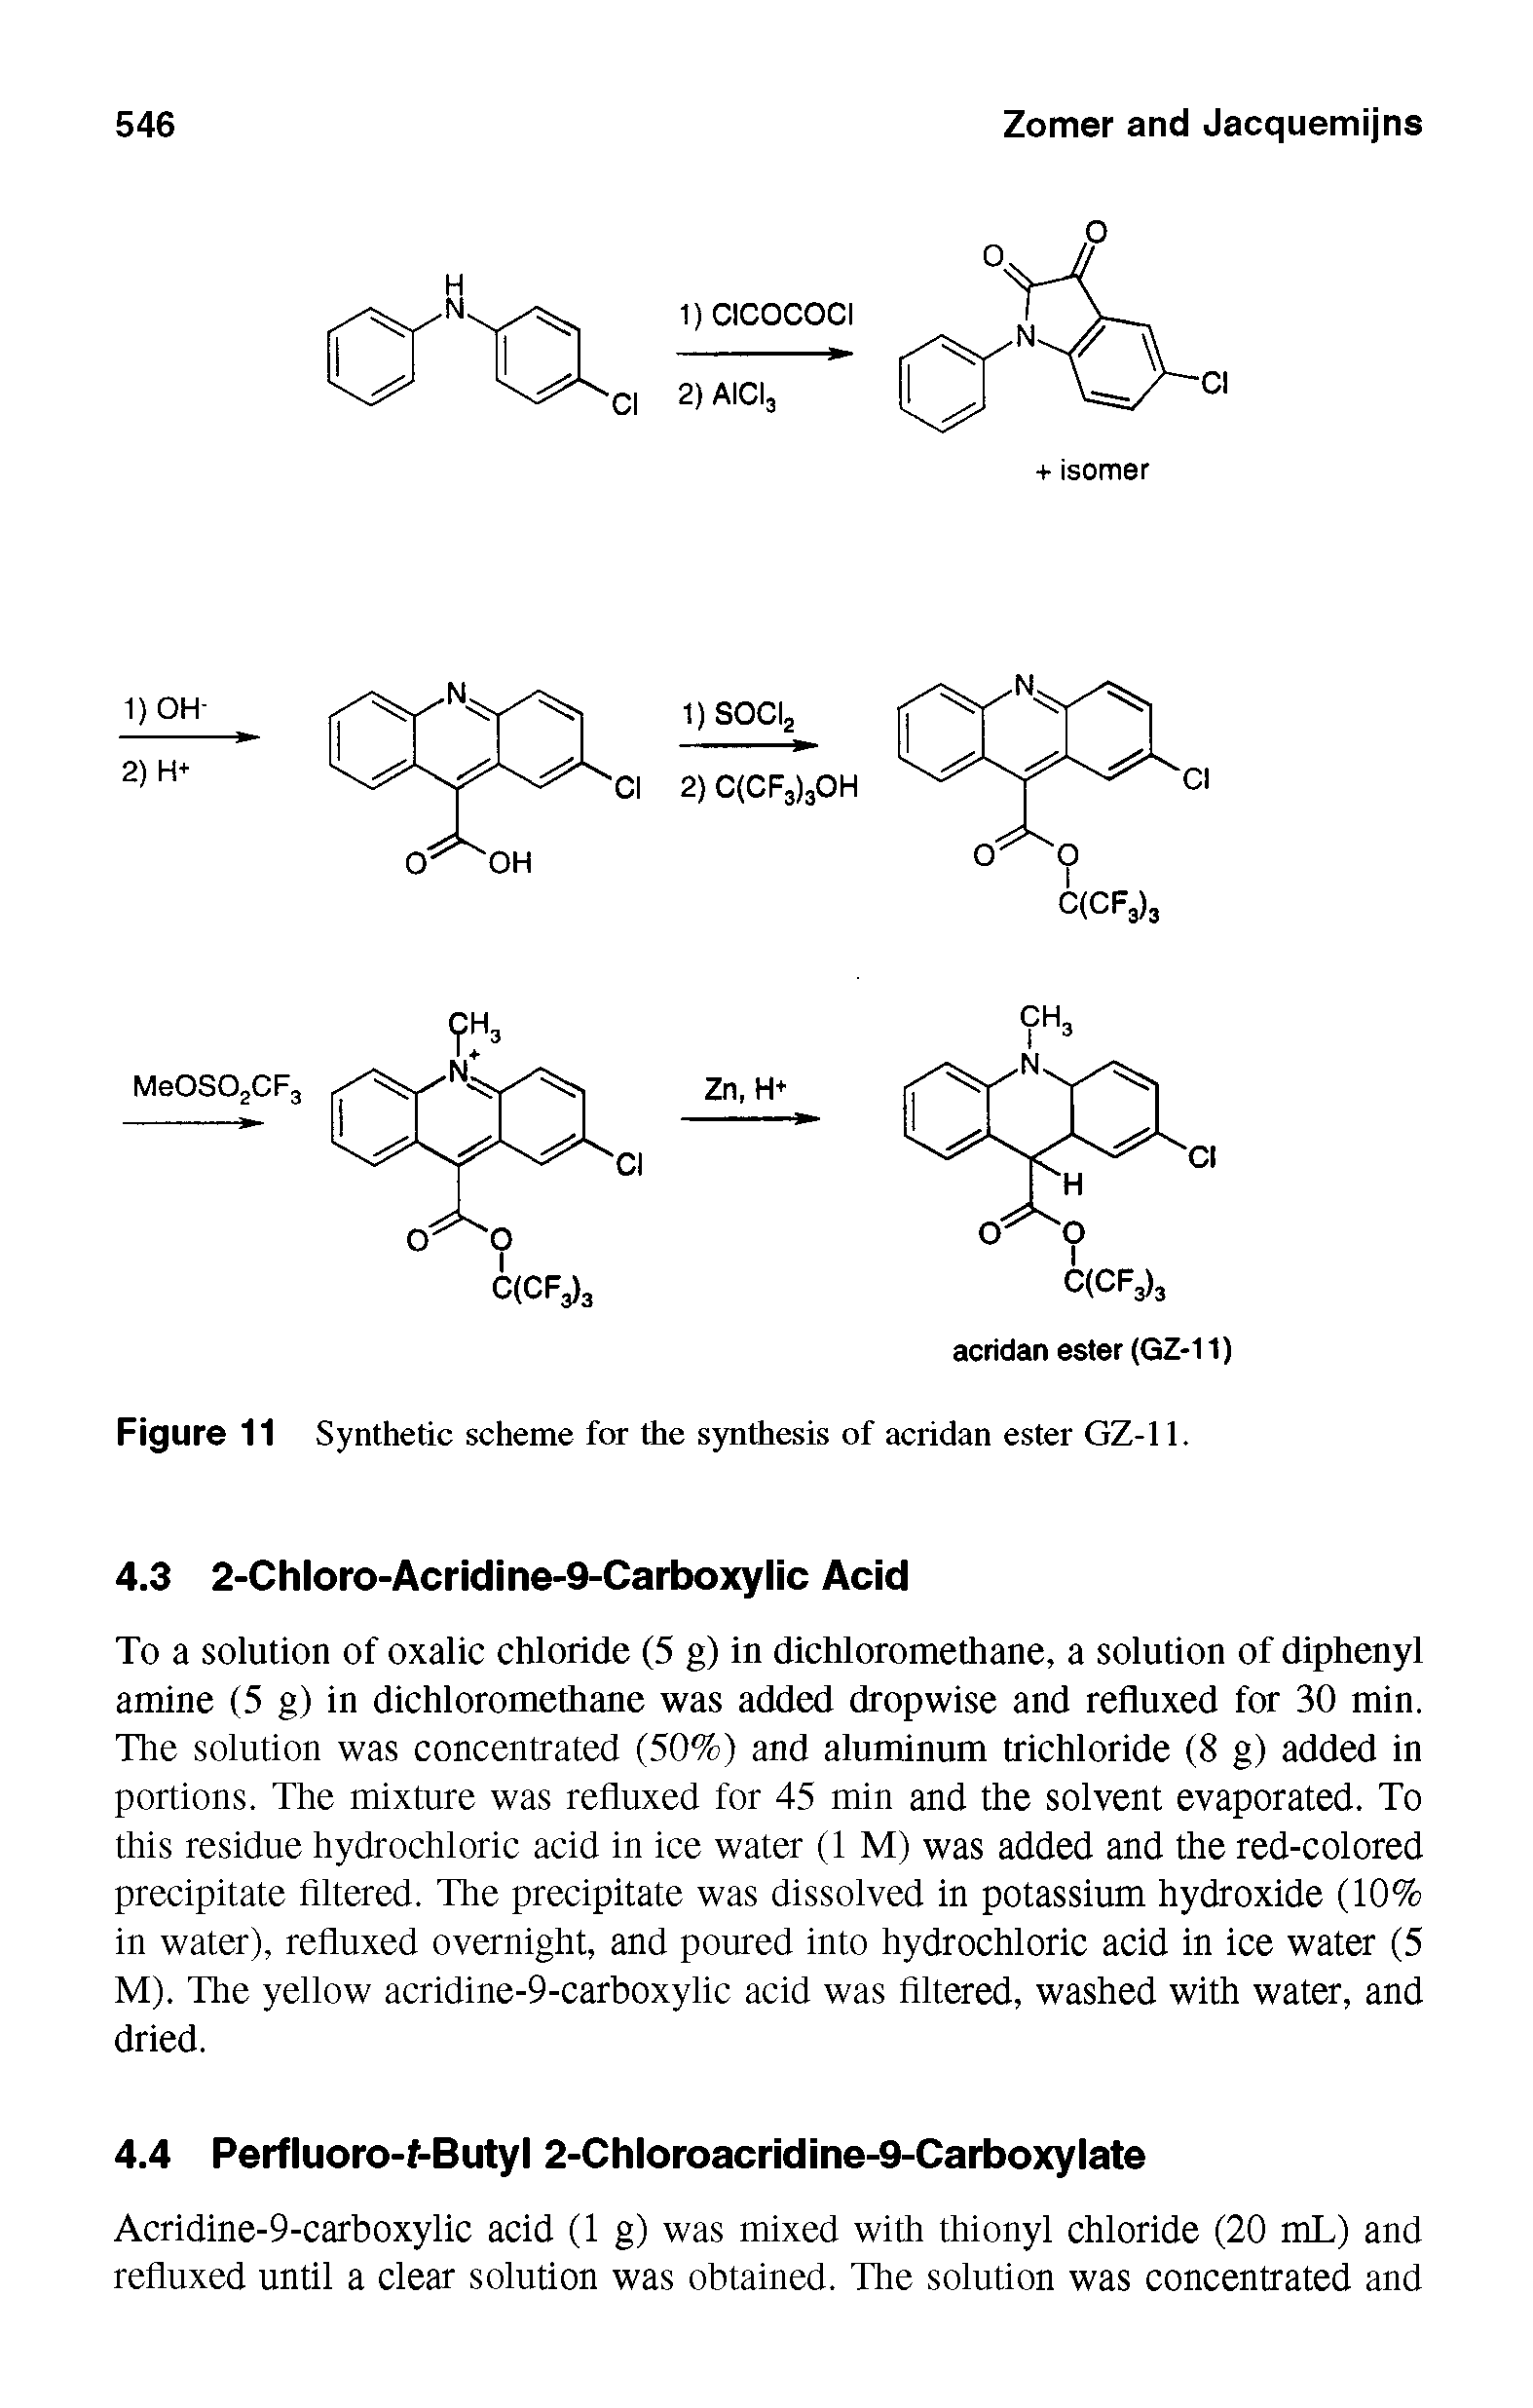 Figure 11 Synthetic scheme for the synthesis of acridan ester GZ-11.